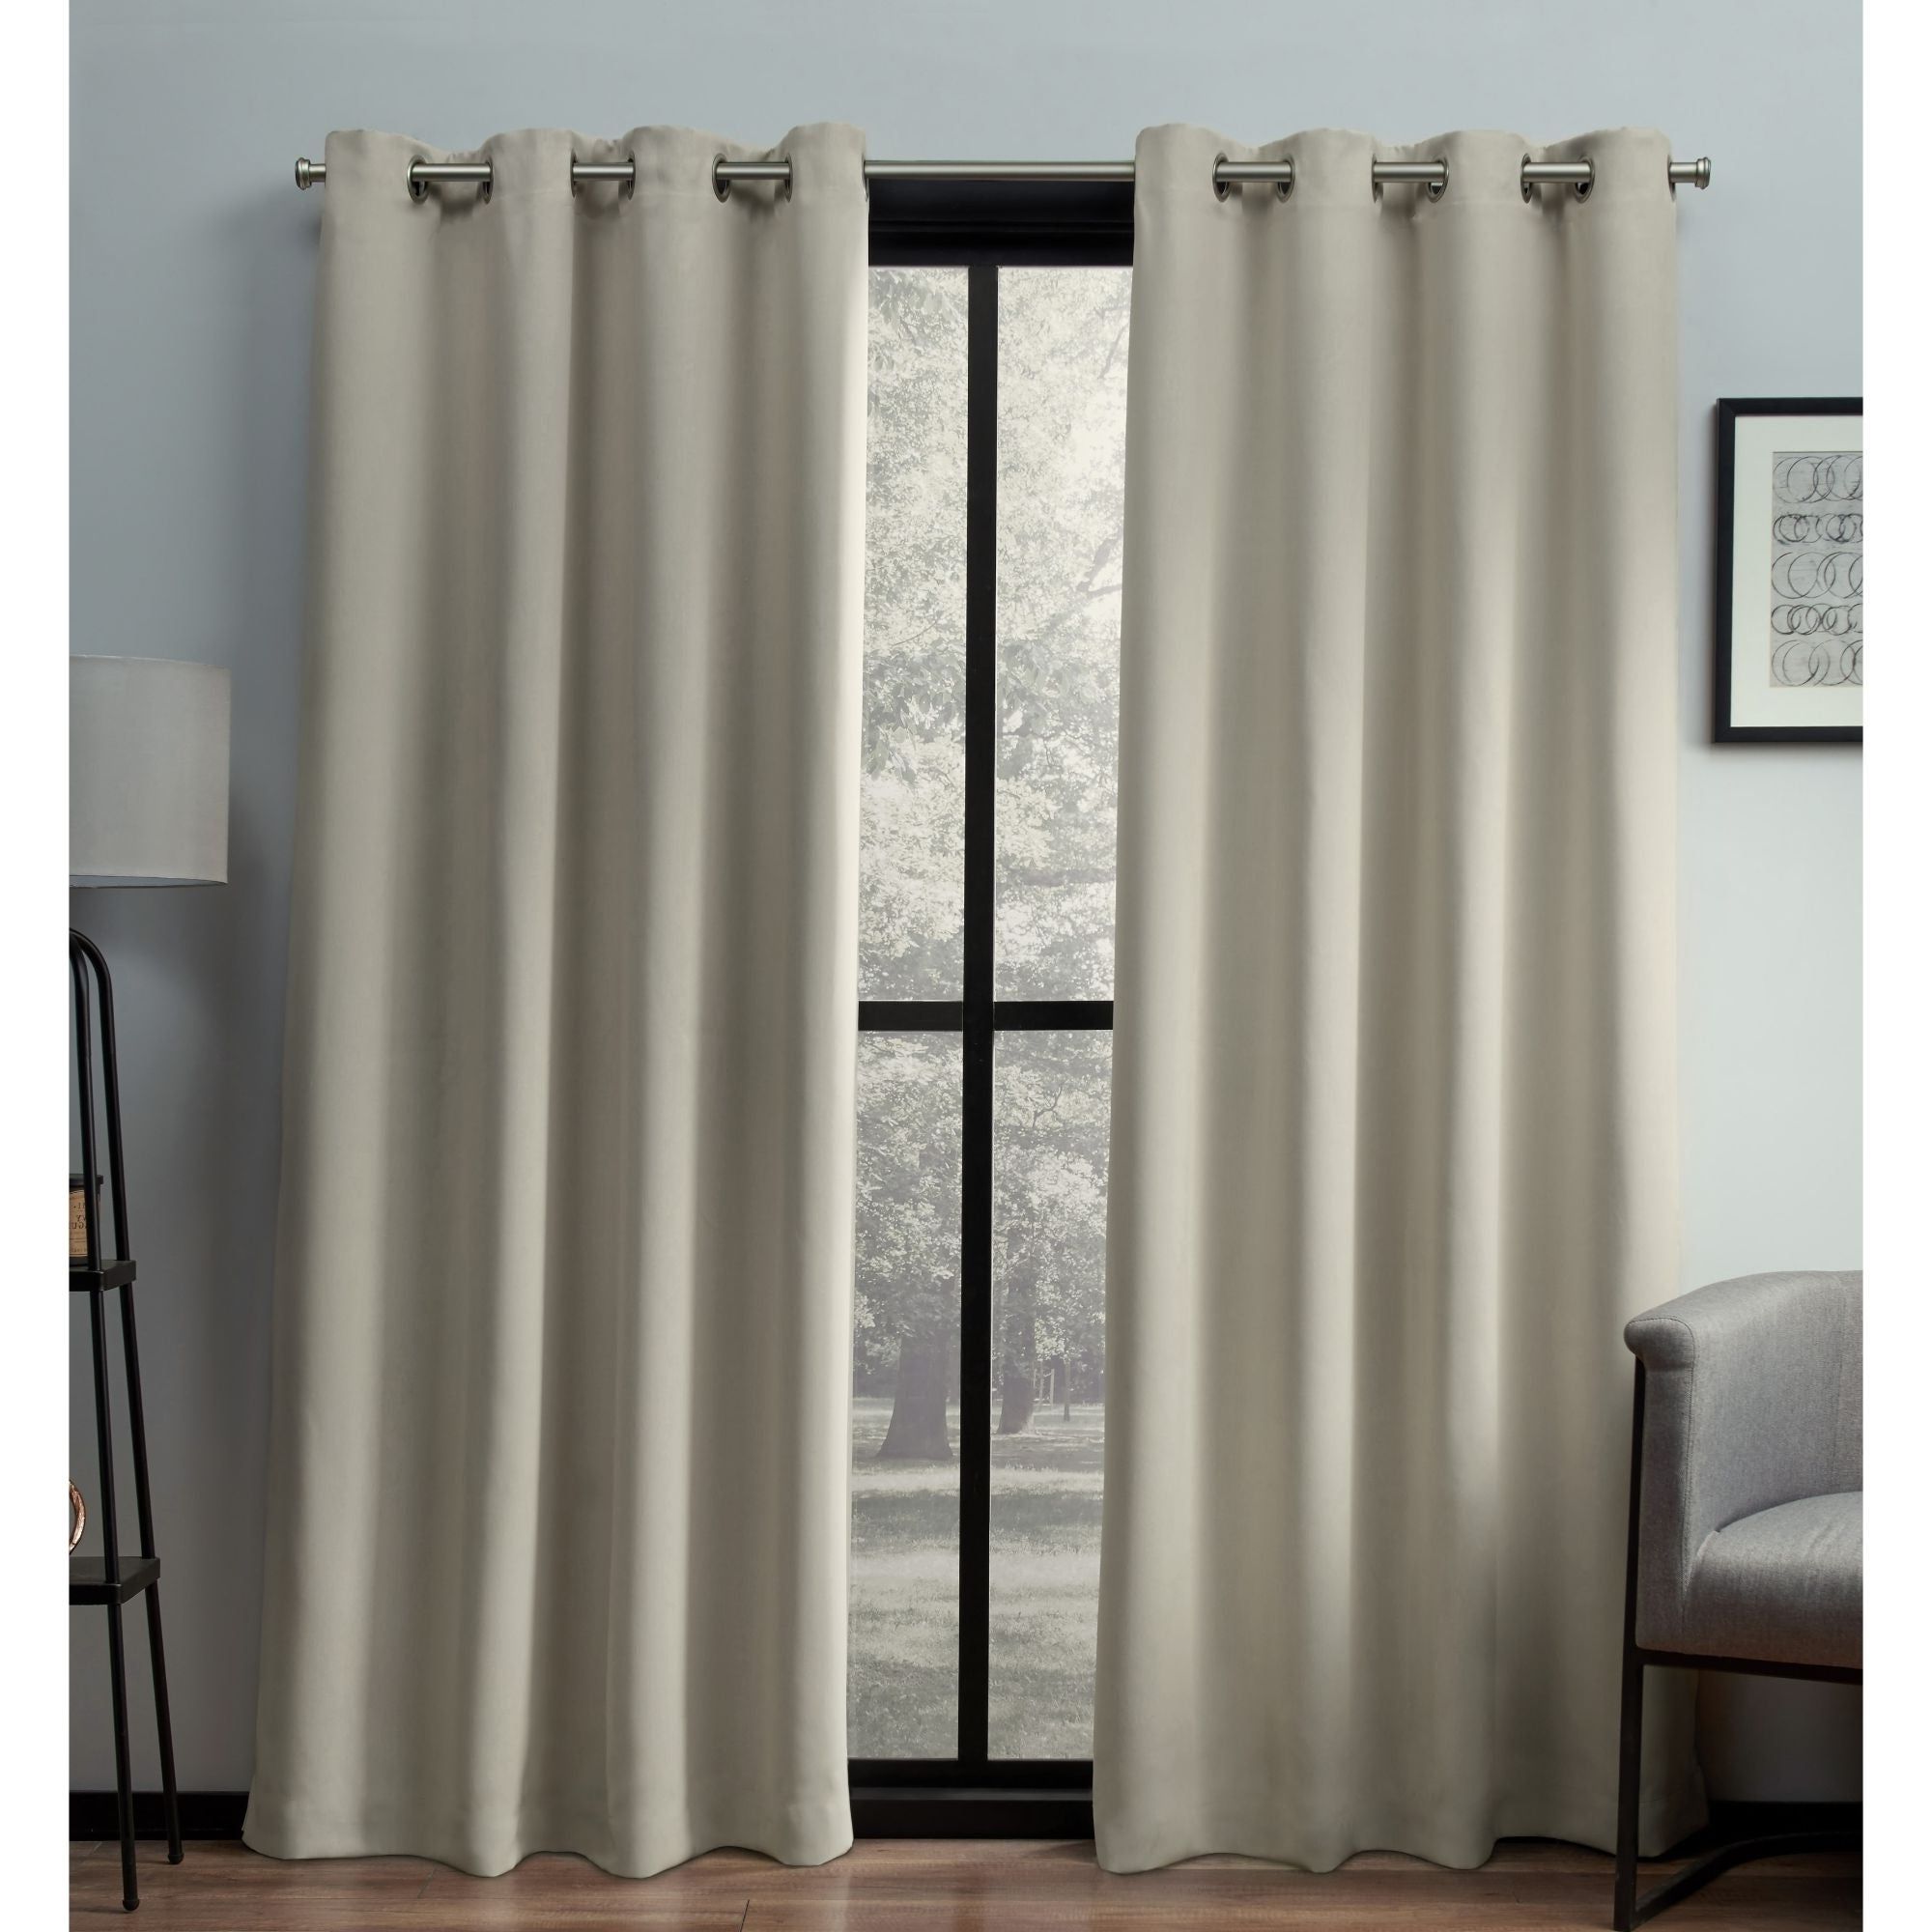 Grommet Room Darkening Curtain Panels Pertaining To Well Known Strick & Bolton Russell Textured Linen Room Darkening Curtain Panel Pair (View 10 of 20)